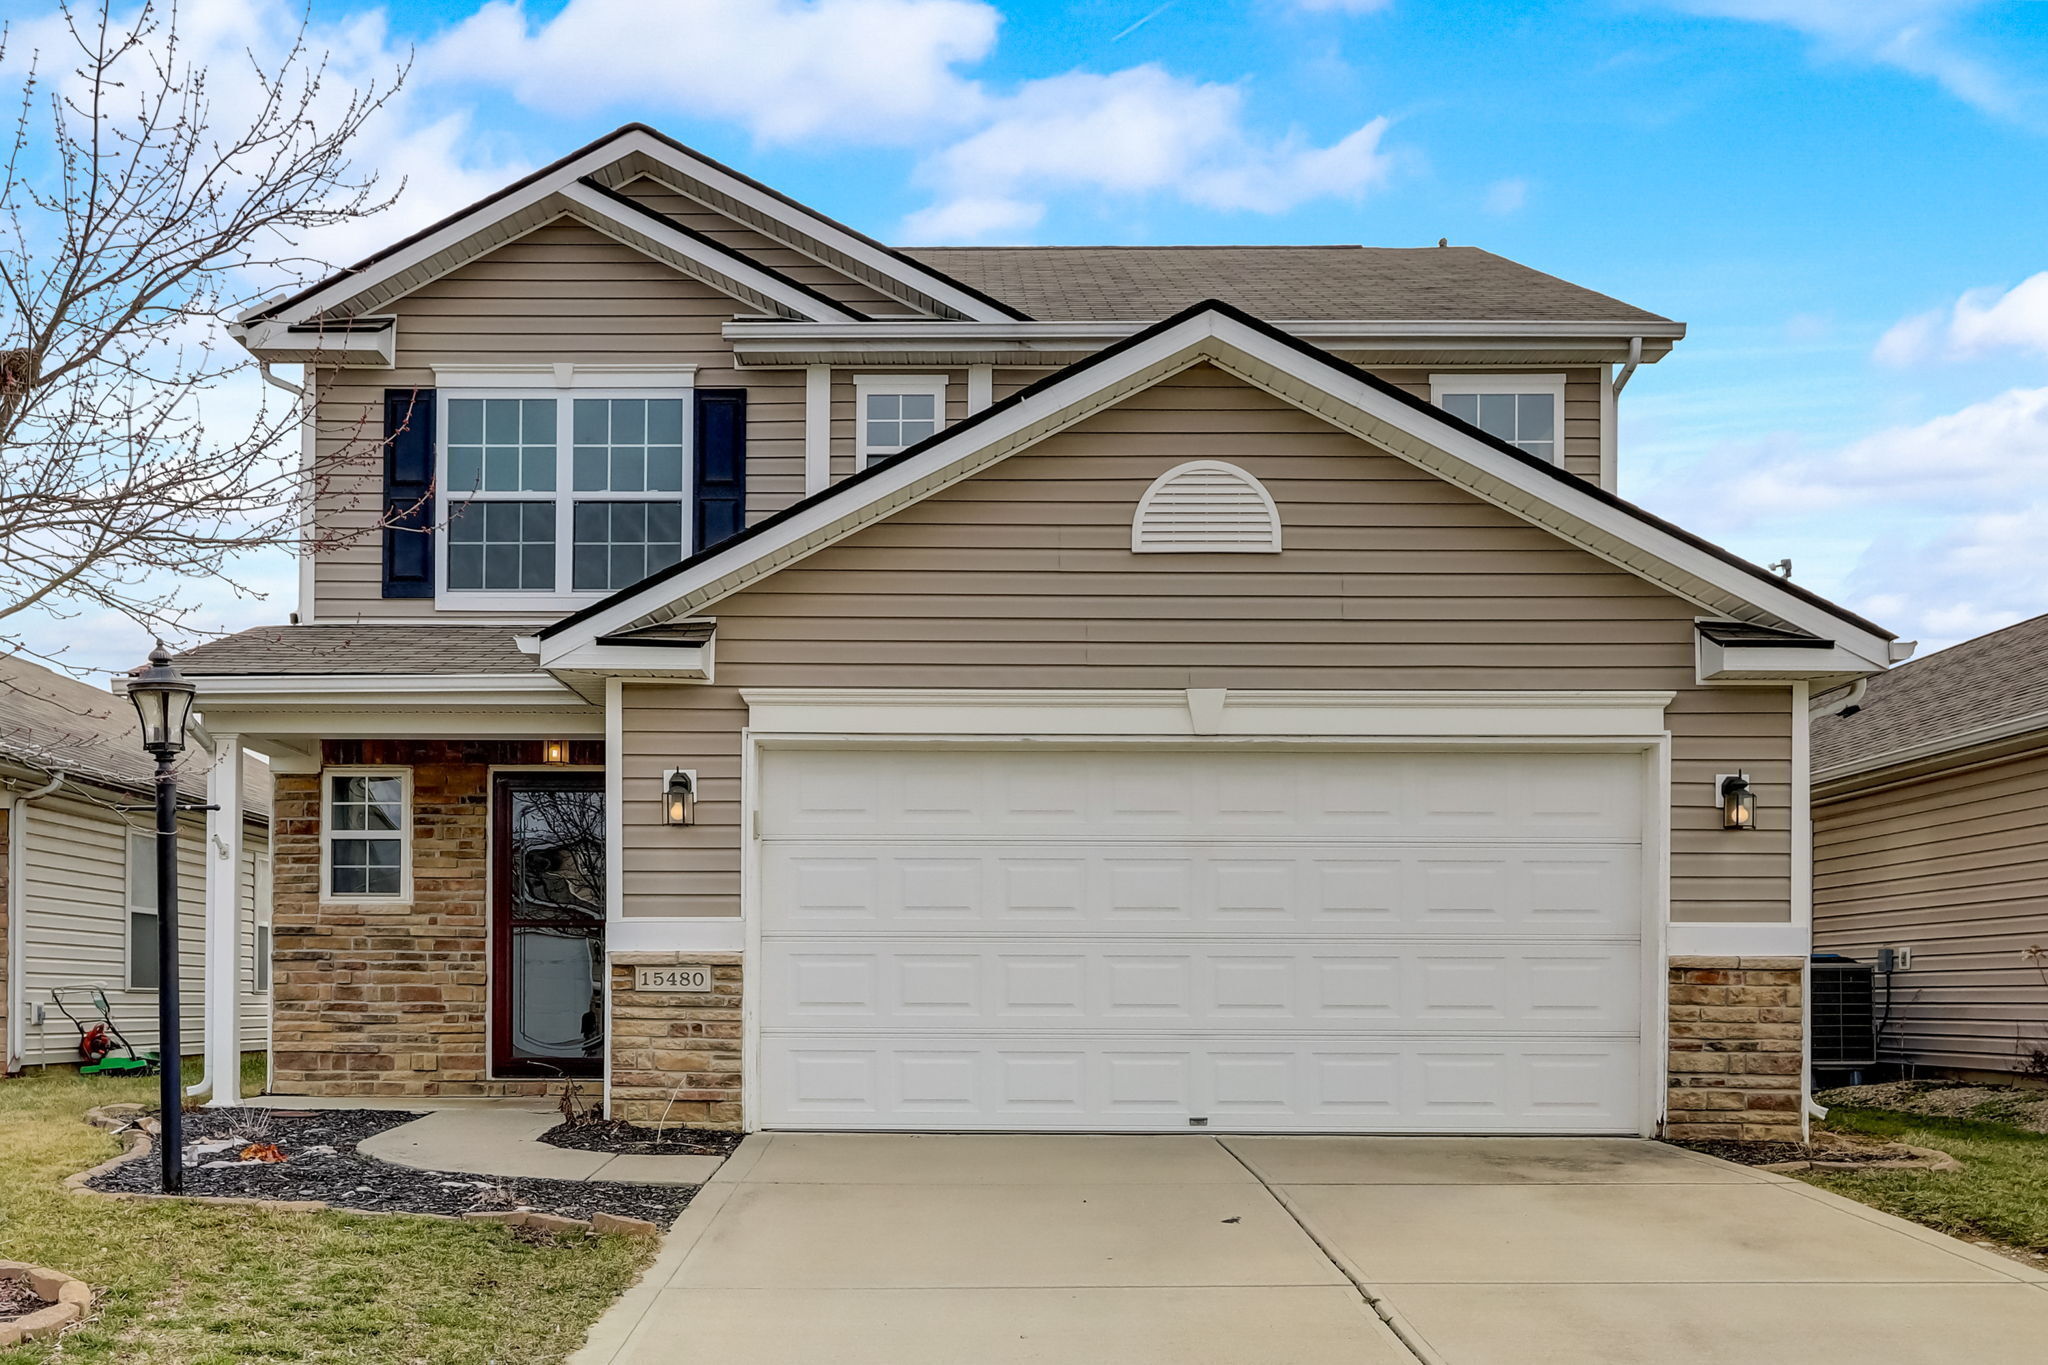 Photo of 15480 Sandlands Circle Noblesville, IN 46060